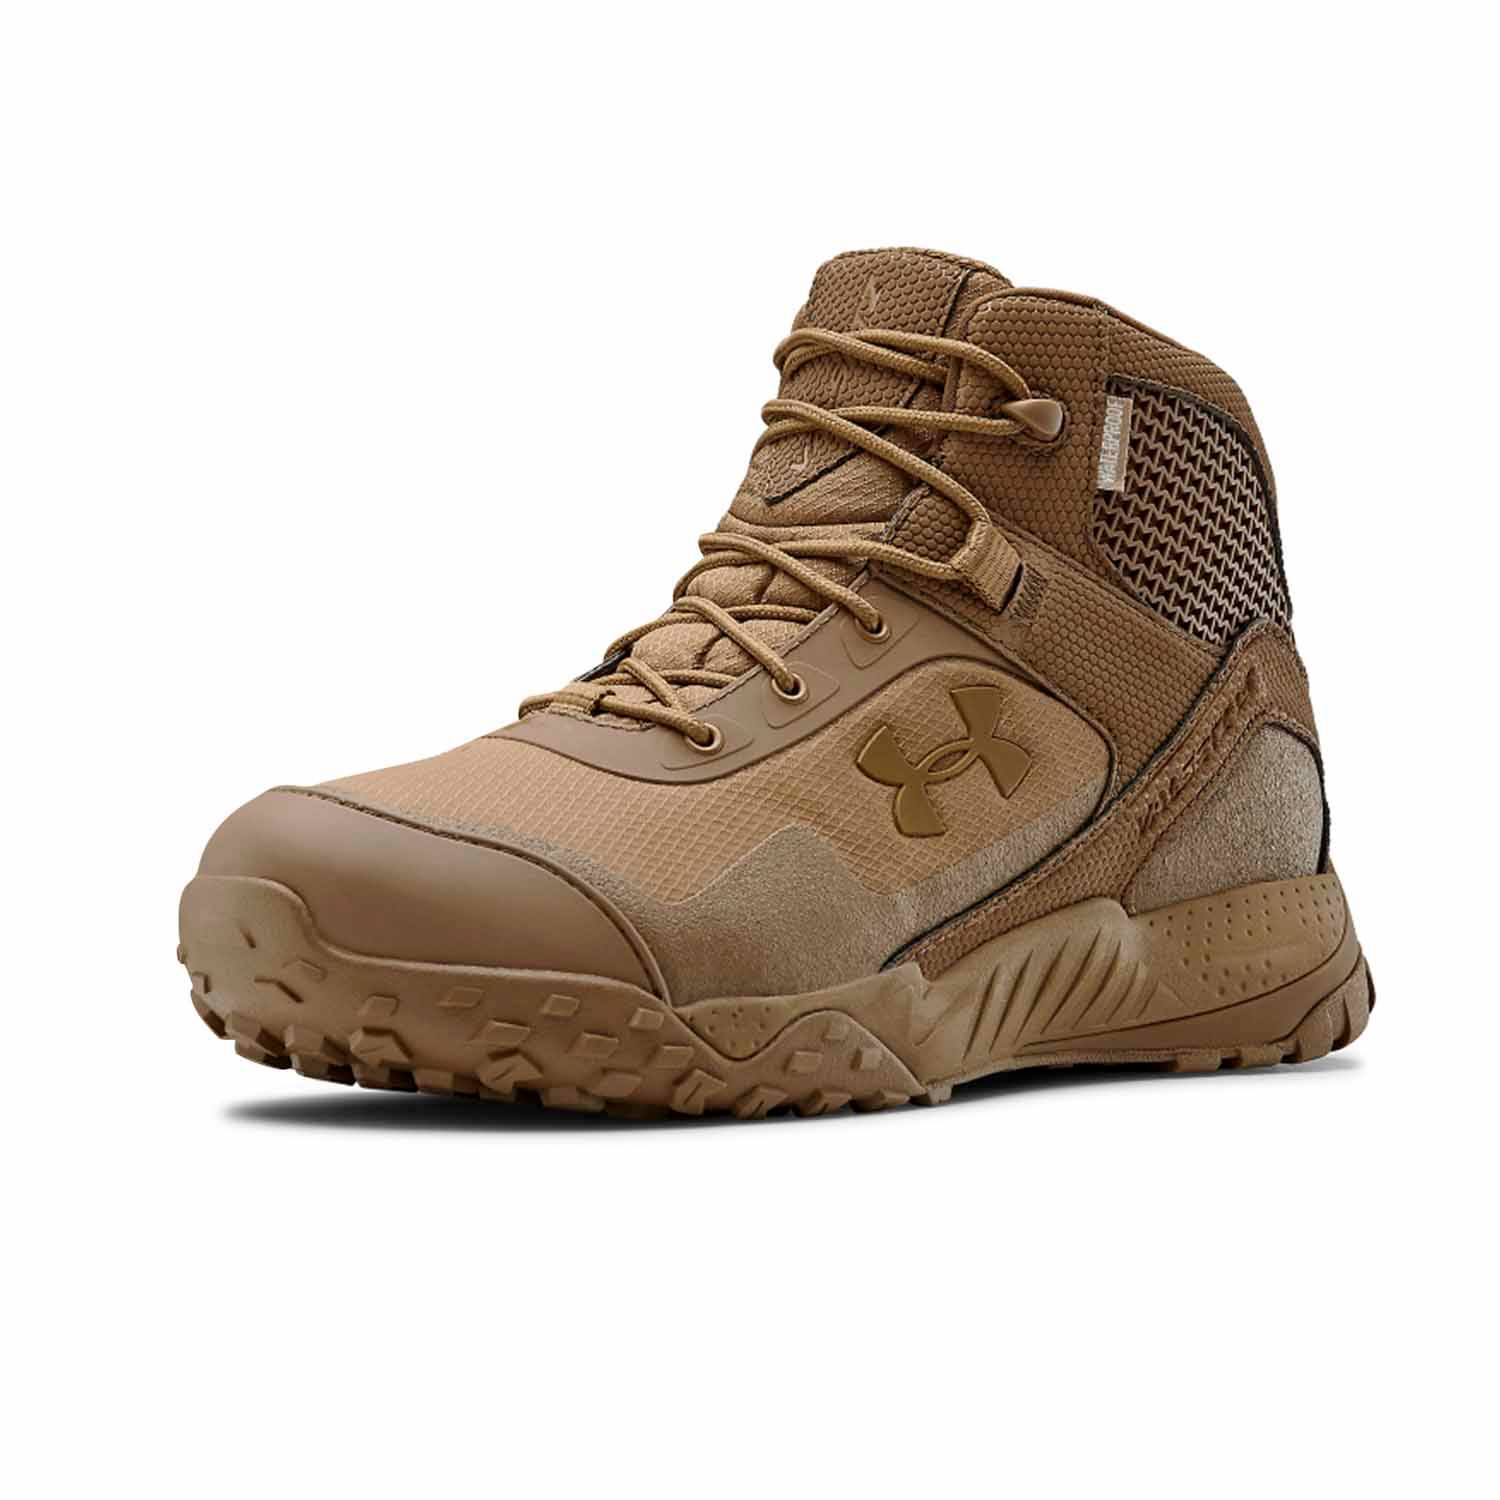 Under Armour Men's Valsetz Rts 1.5 Waterproof Military and Tactical Boot